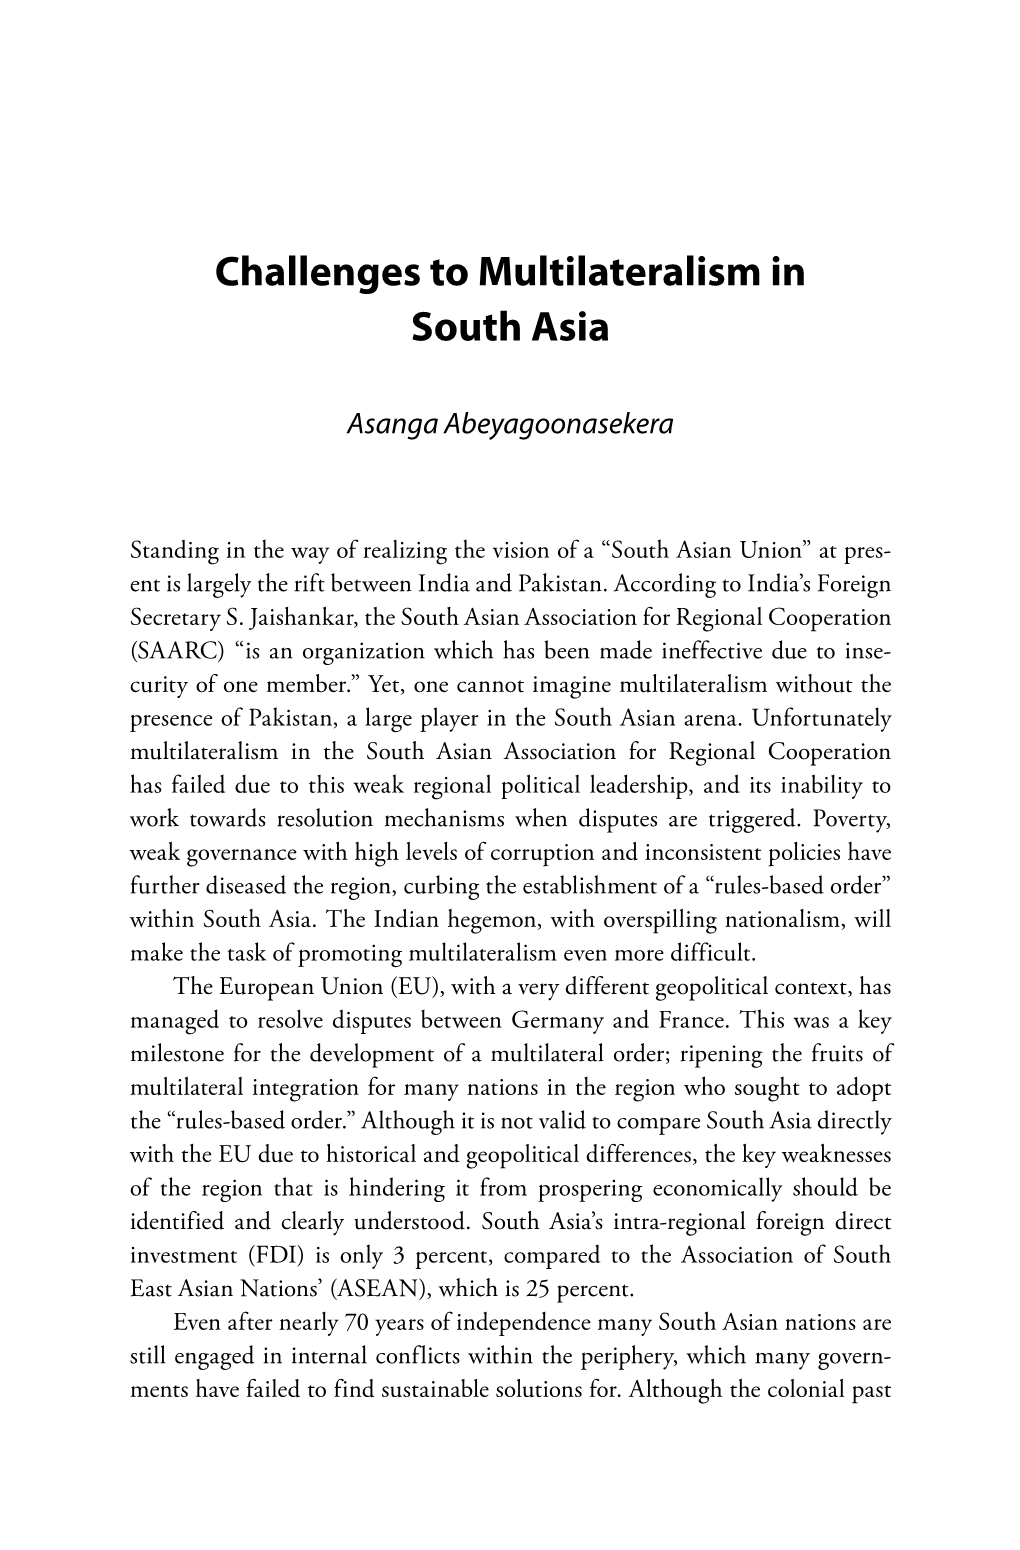 Challenges to Multilateralism in South Asia